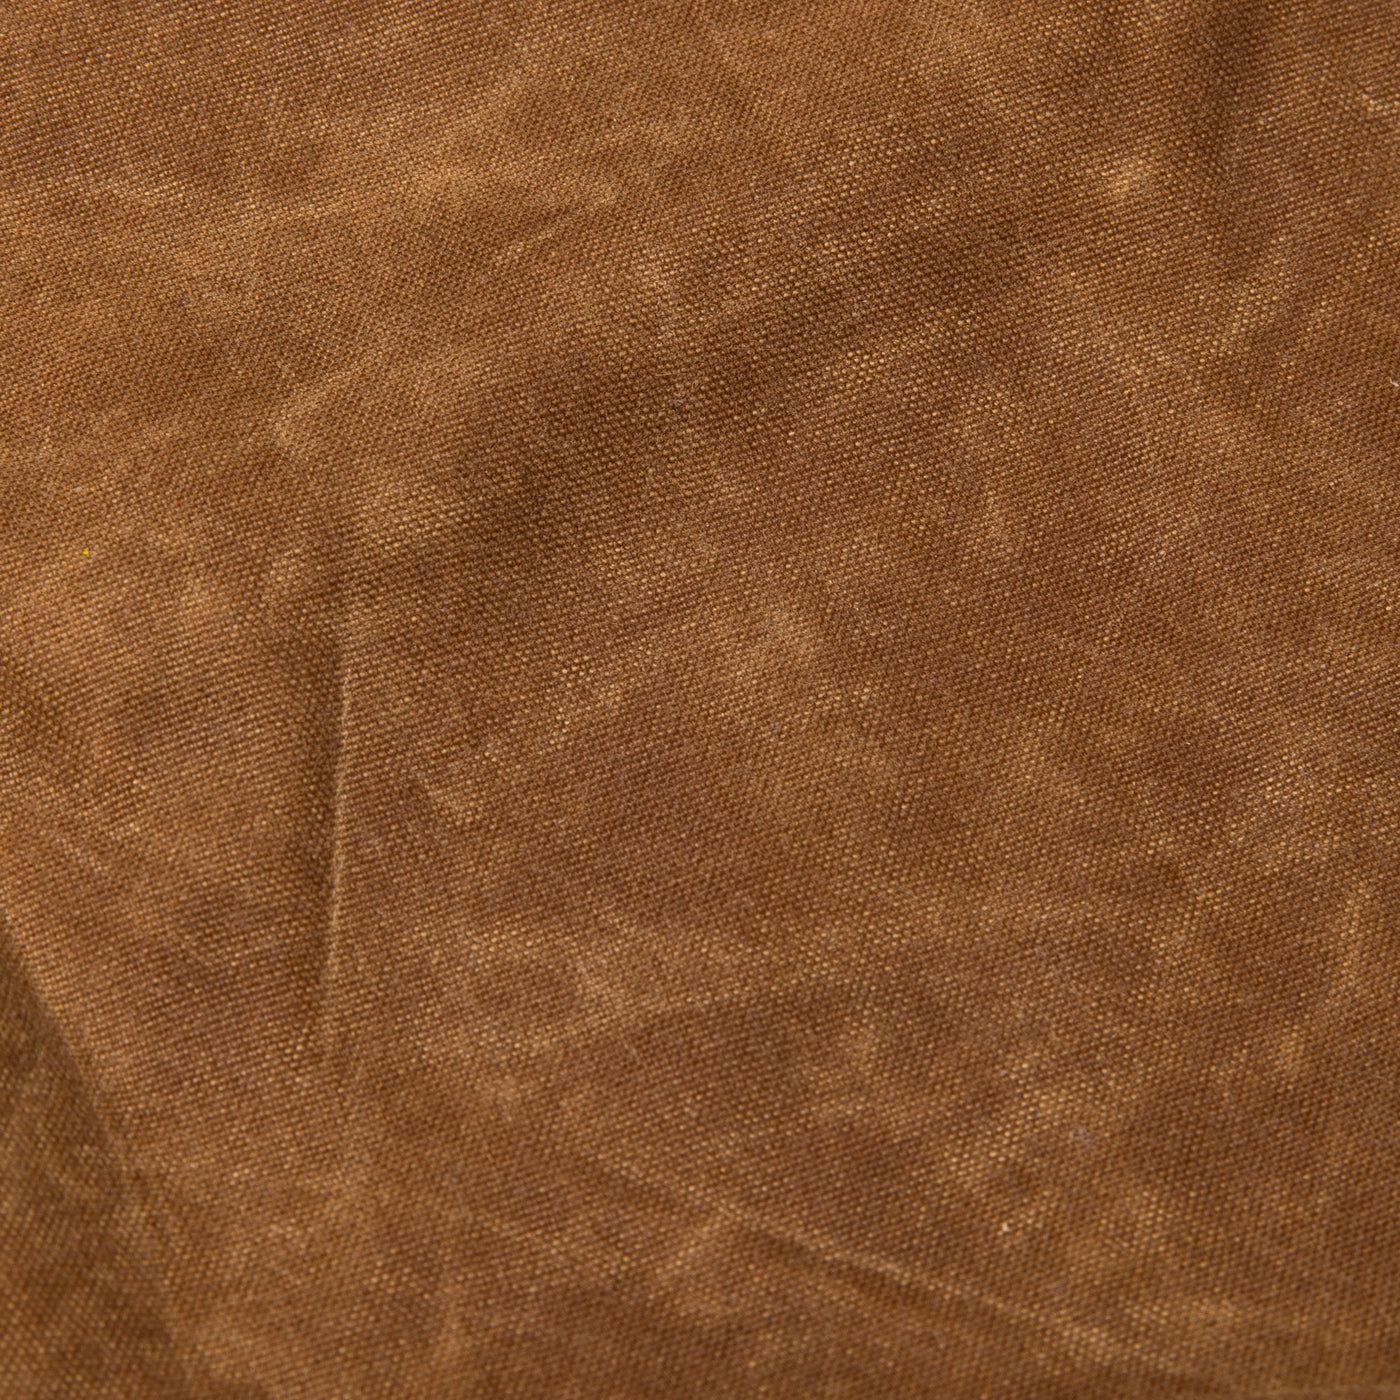 Detail view of Brown Wax Canvas fabric.